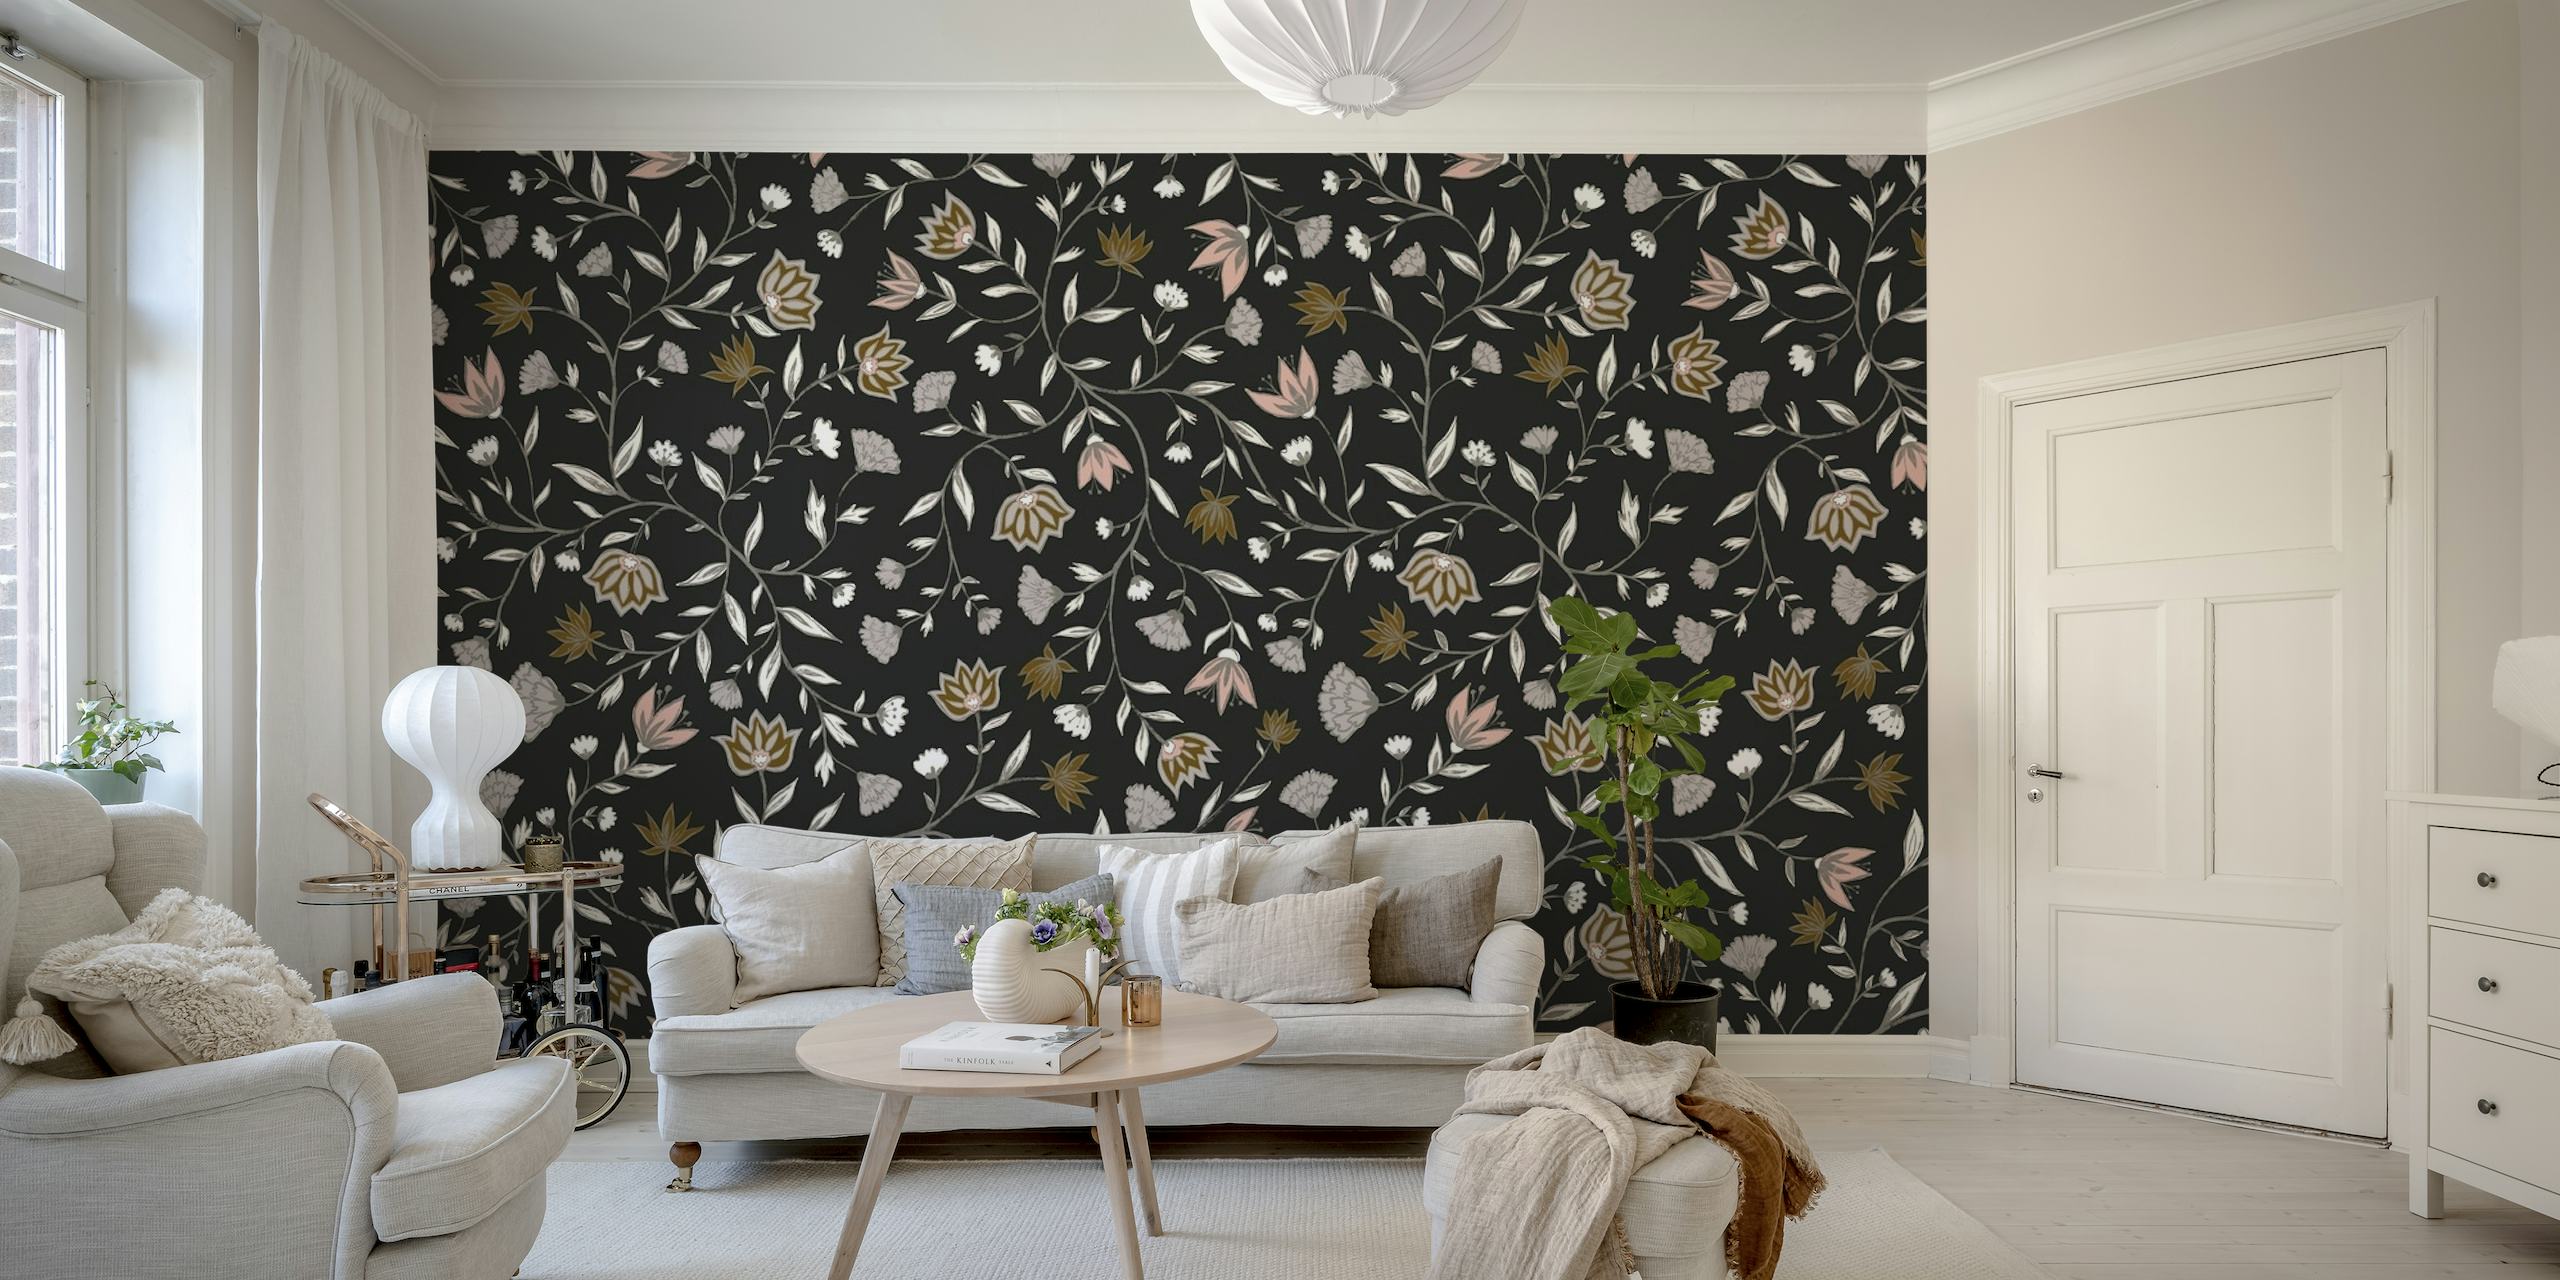 Innessa Floral Midnight wall mural with dark floral pattern on a midnight background